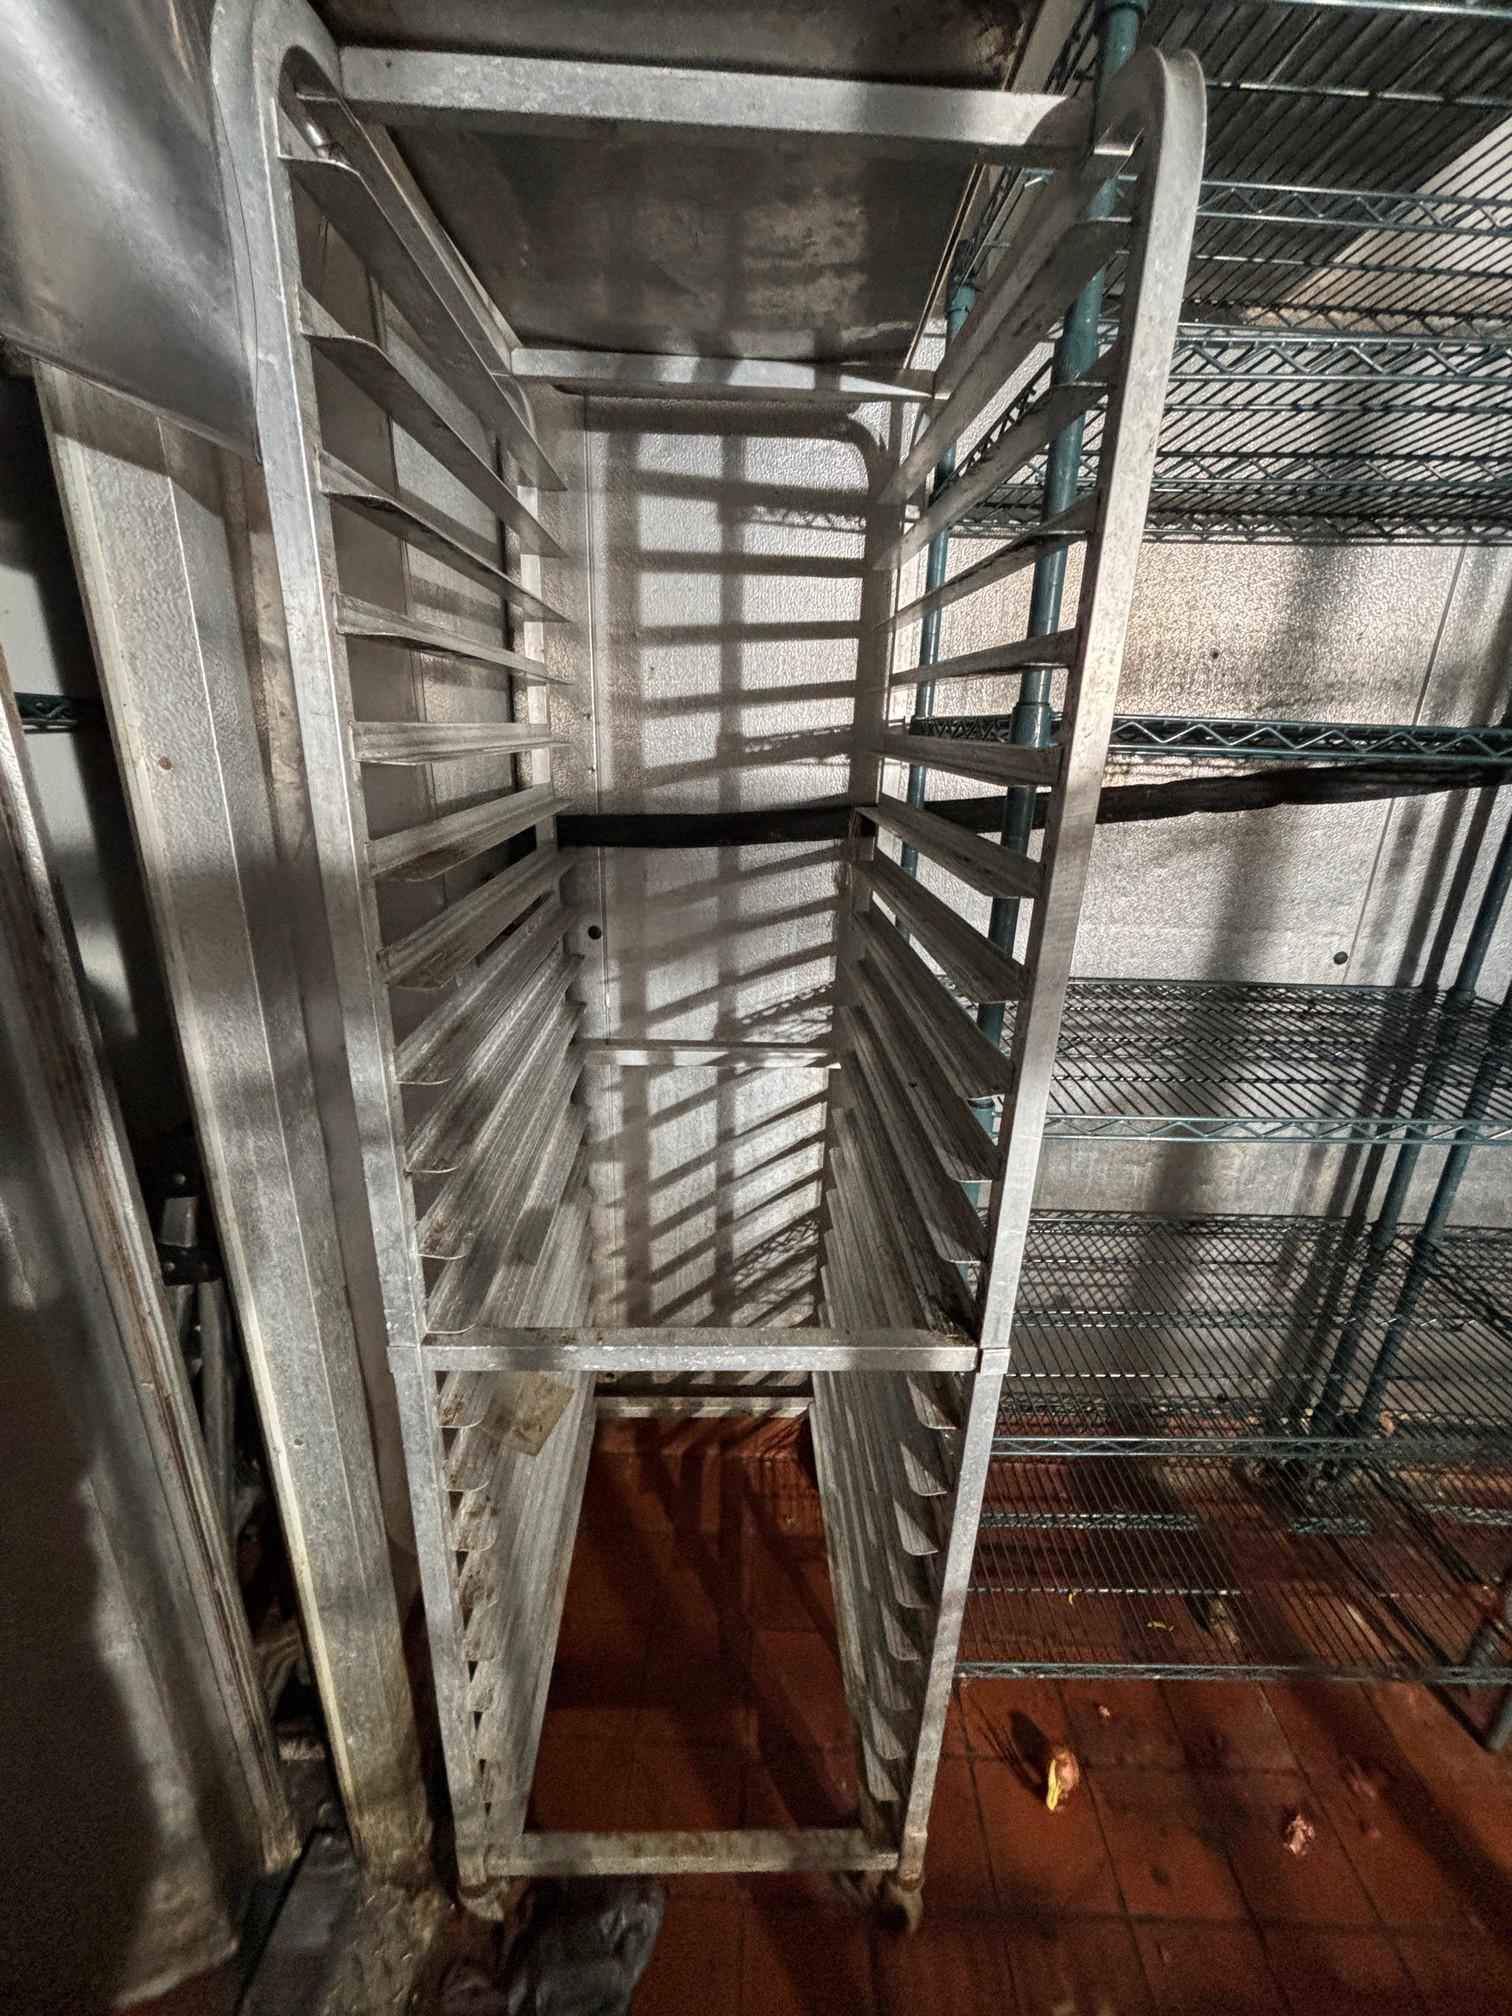 All S.S. Baking Sheet Rack on Casters